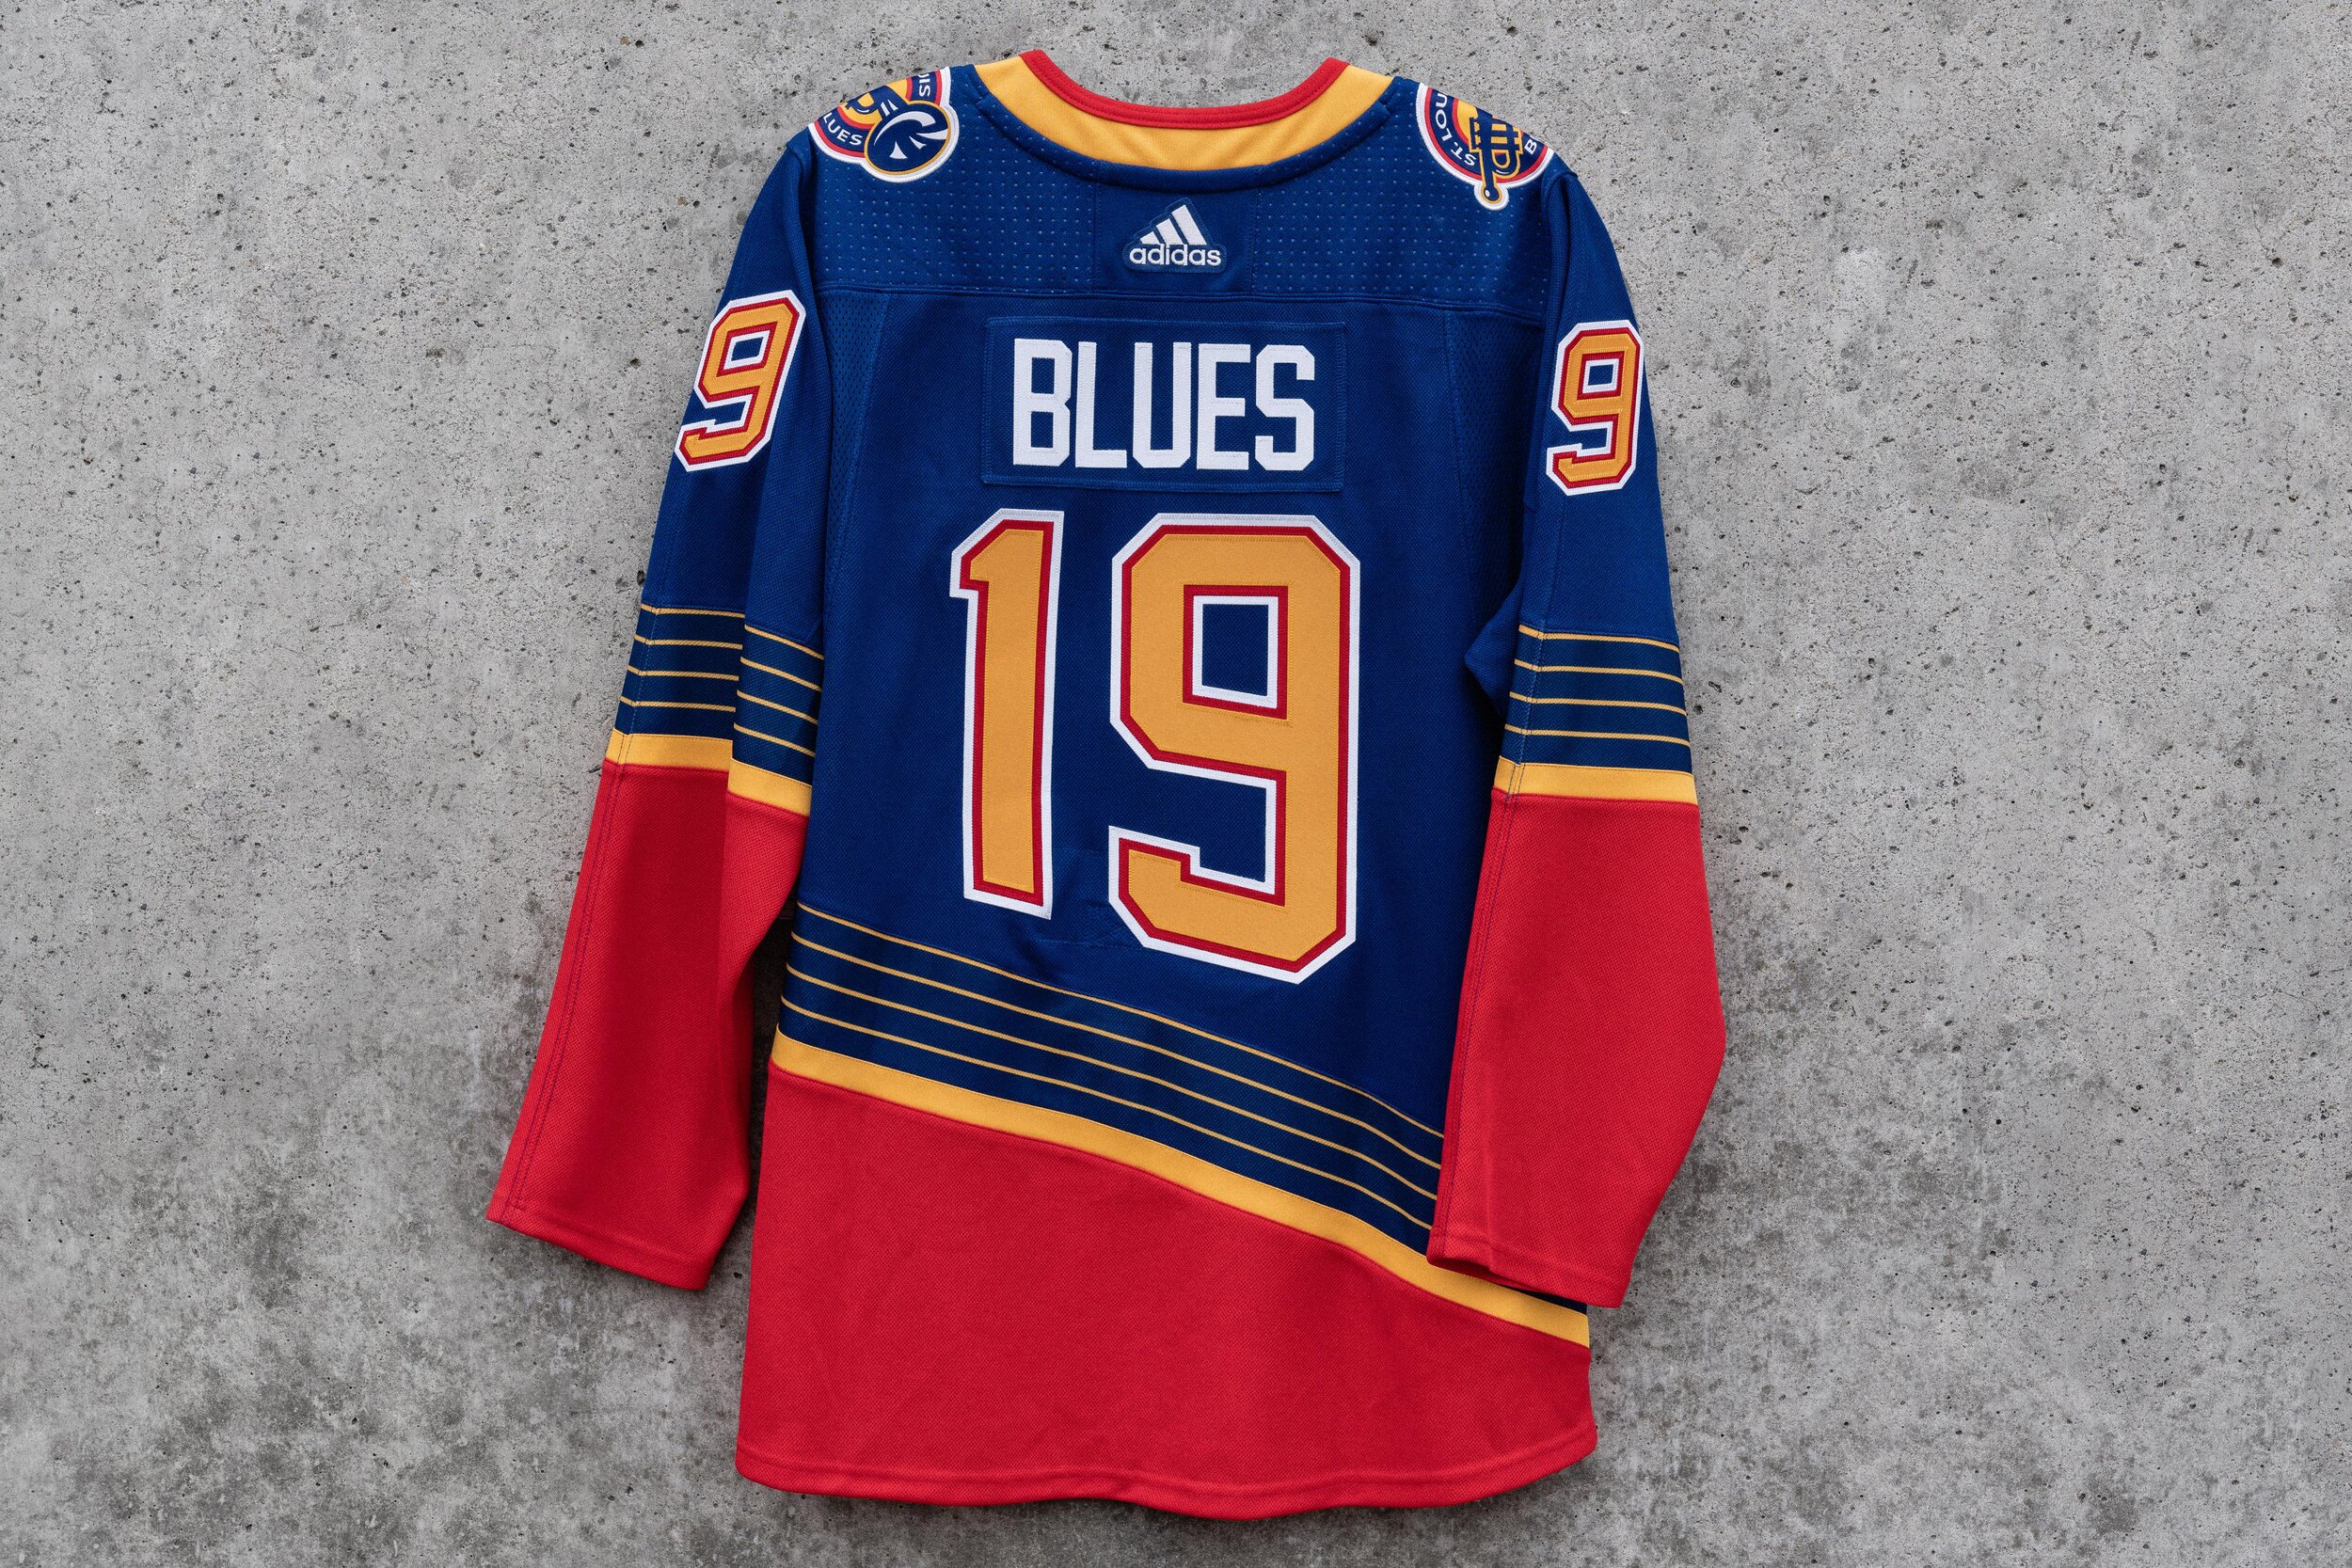 Brett Hull St. Louis Blues Autographed adidas 90s Retro Authentic Jersey  with Last to Wear #16 Inscription - Limited Edition of 16